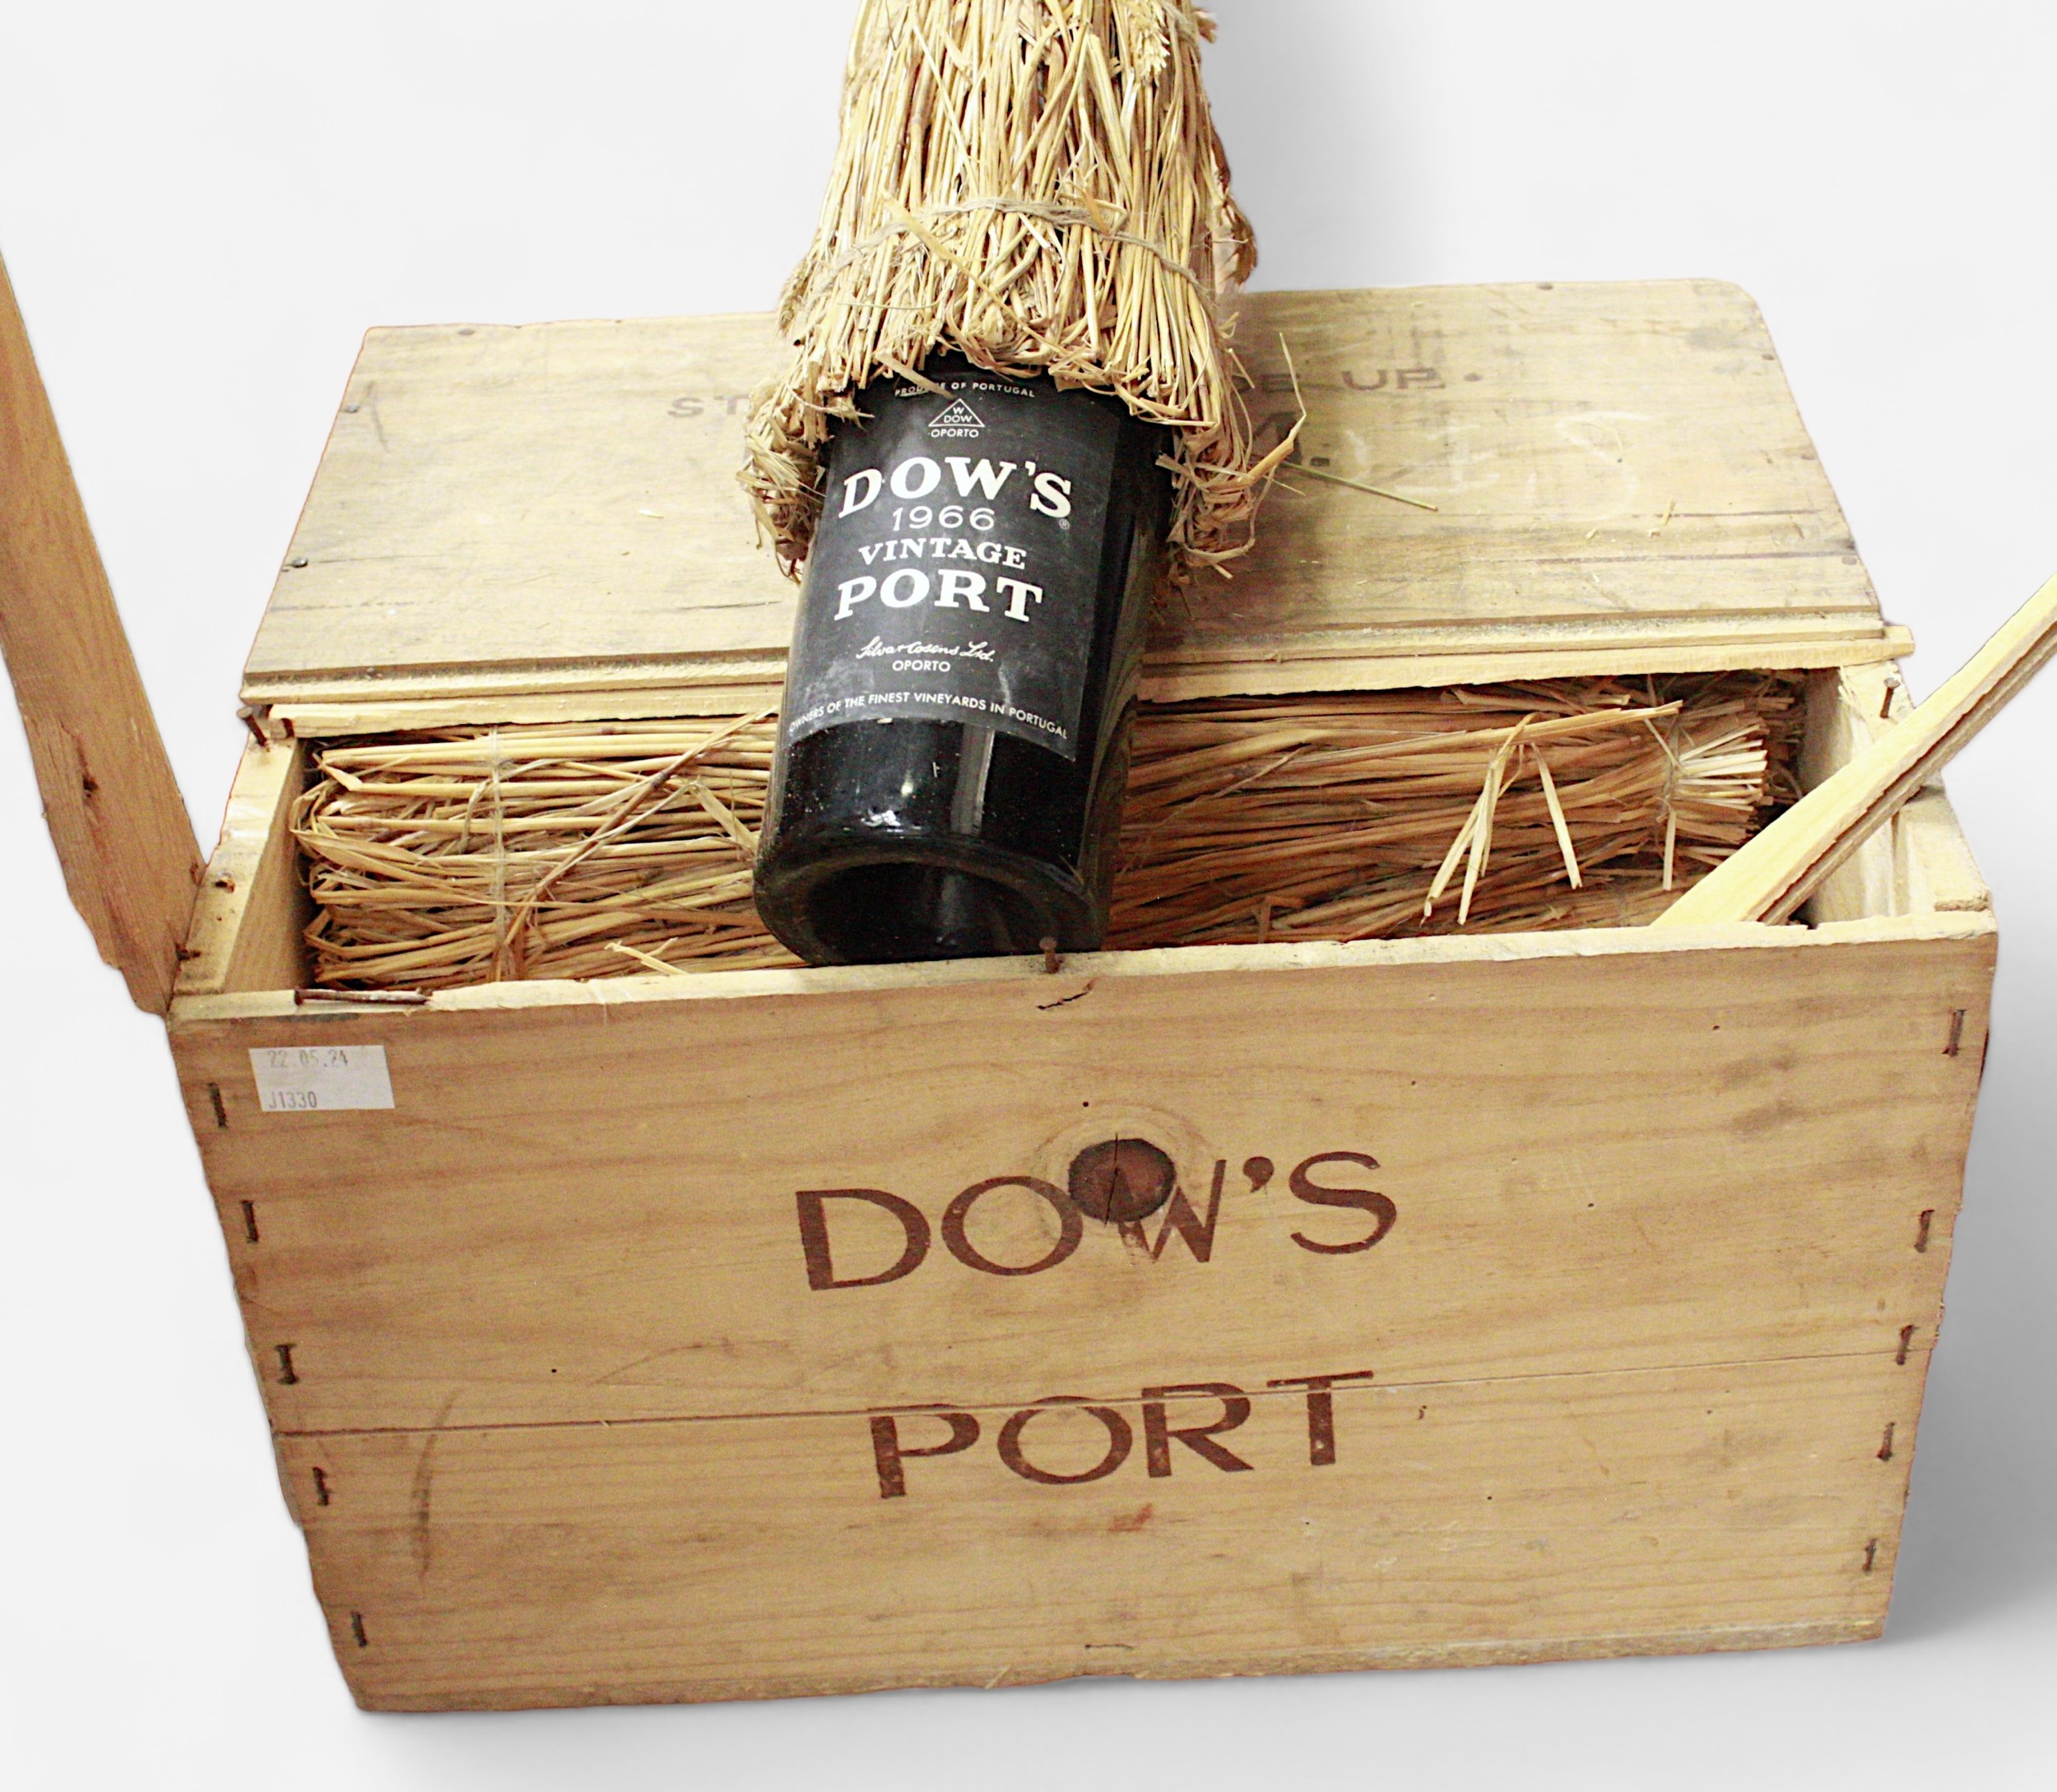 A case of 12 bottles of 1966 vintage Dow’s port, all unopened with labels intact and wax seals to